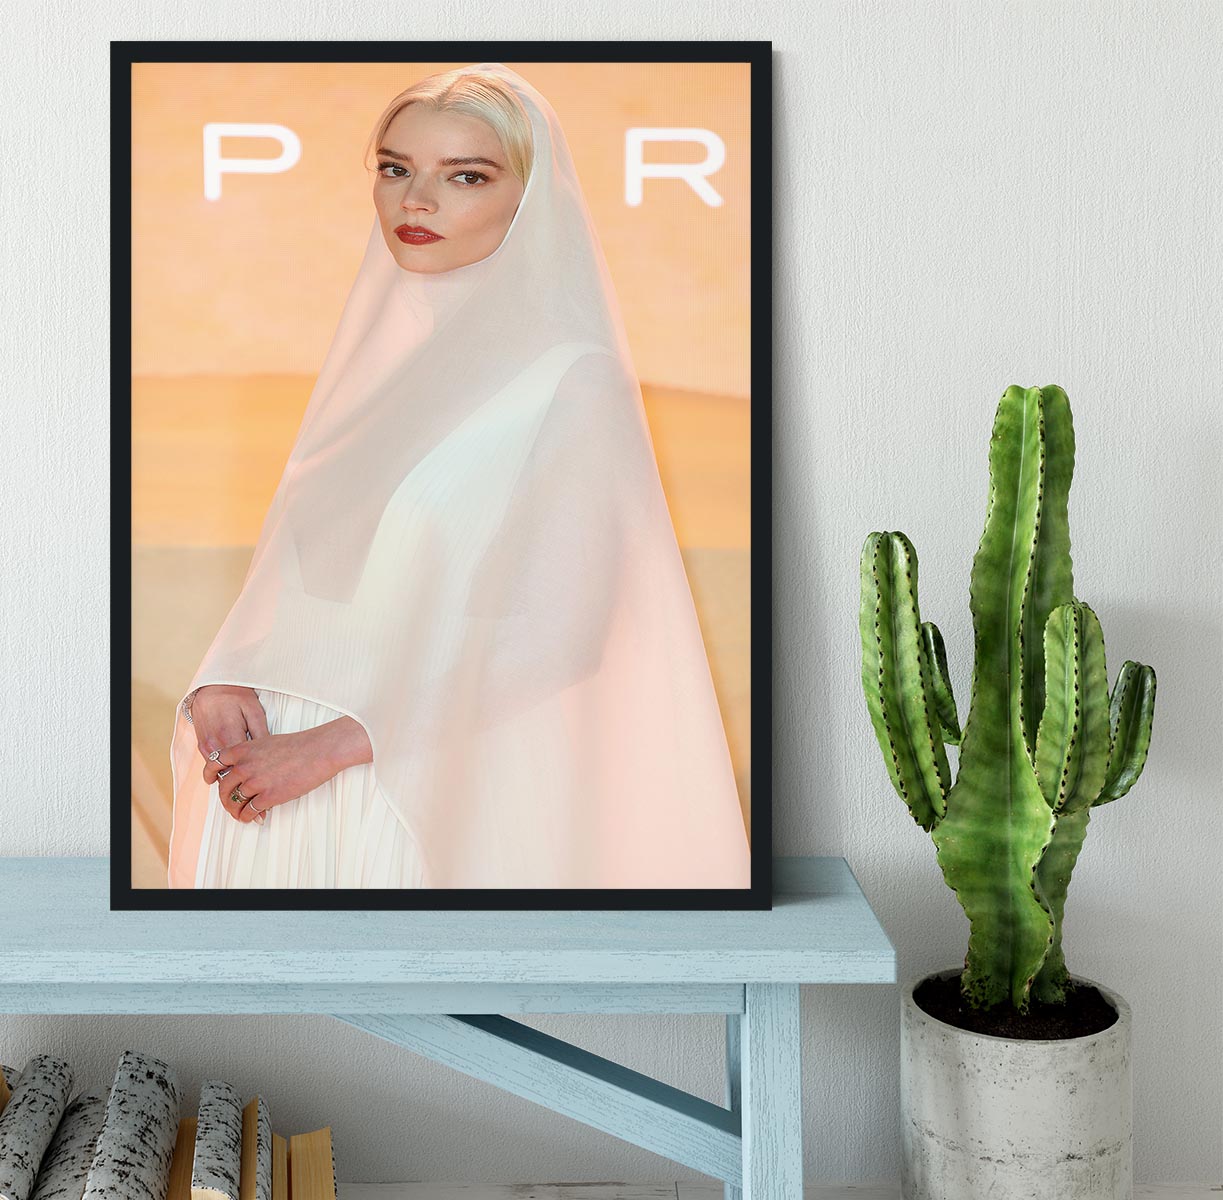 Anya Taylor Joy at the premiere of Dune part two Framed Print - Canvas Art Rocks - 2